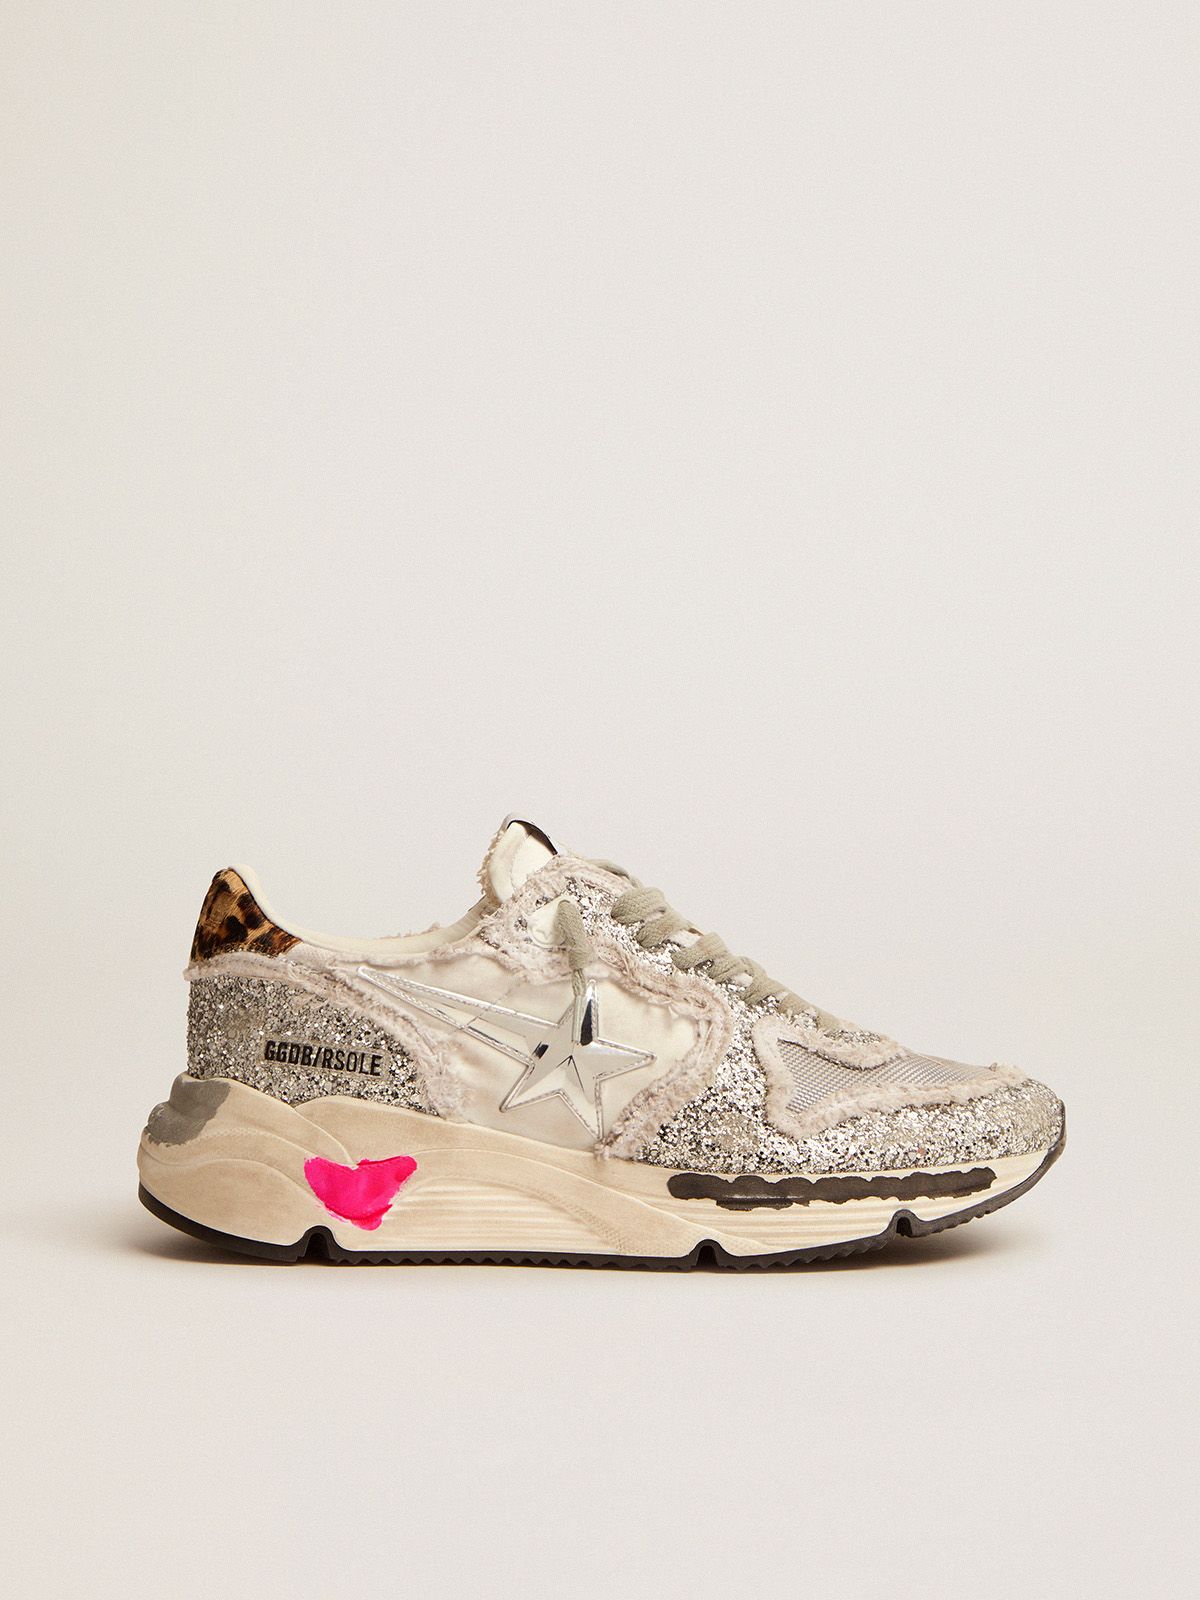 golden goose tab with glitter heel in pony silver leopard-print Running nylon and skin sneakers Sole